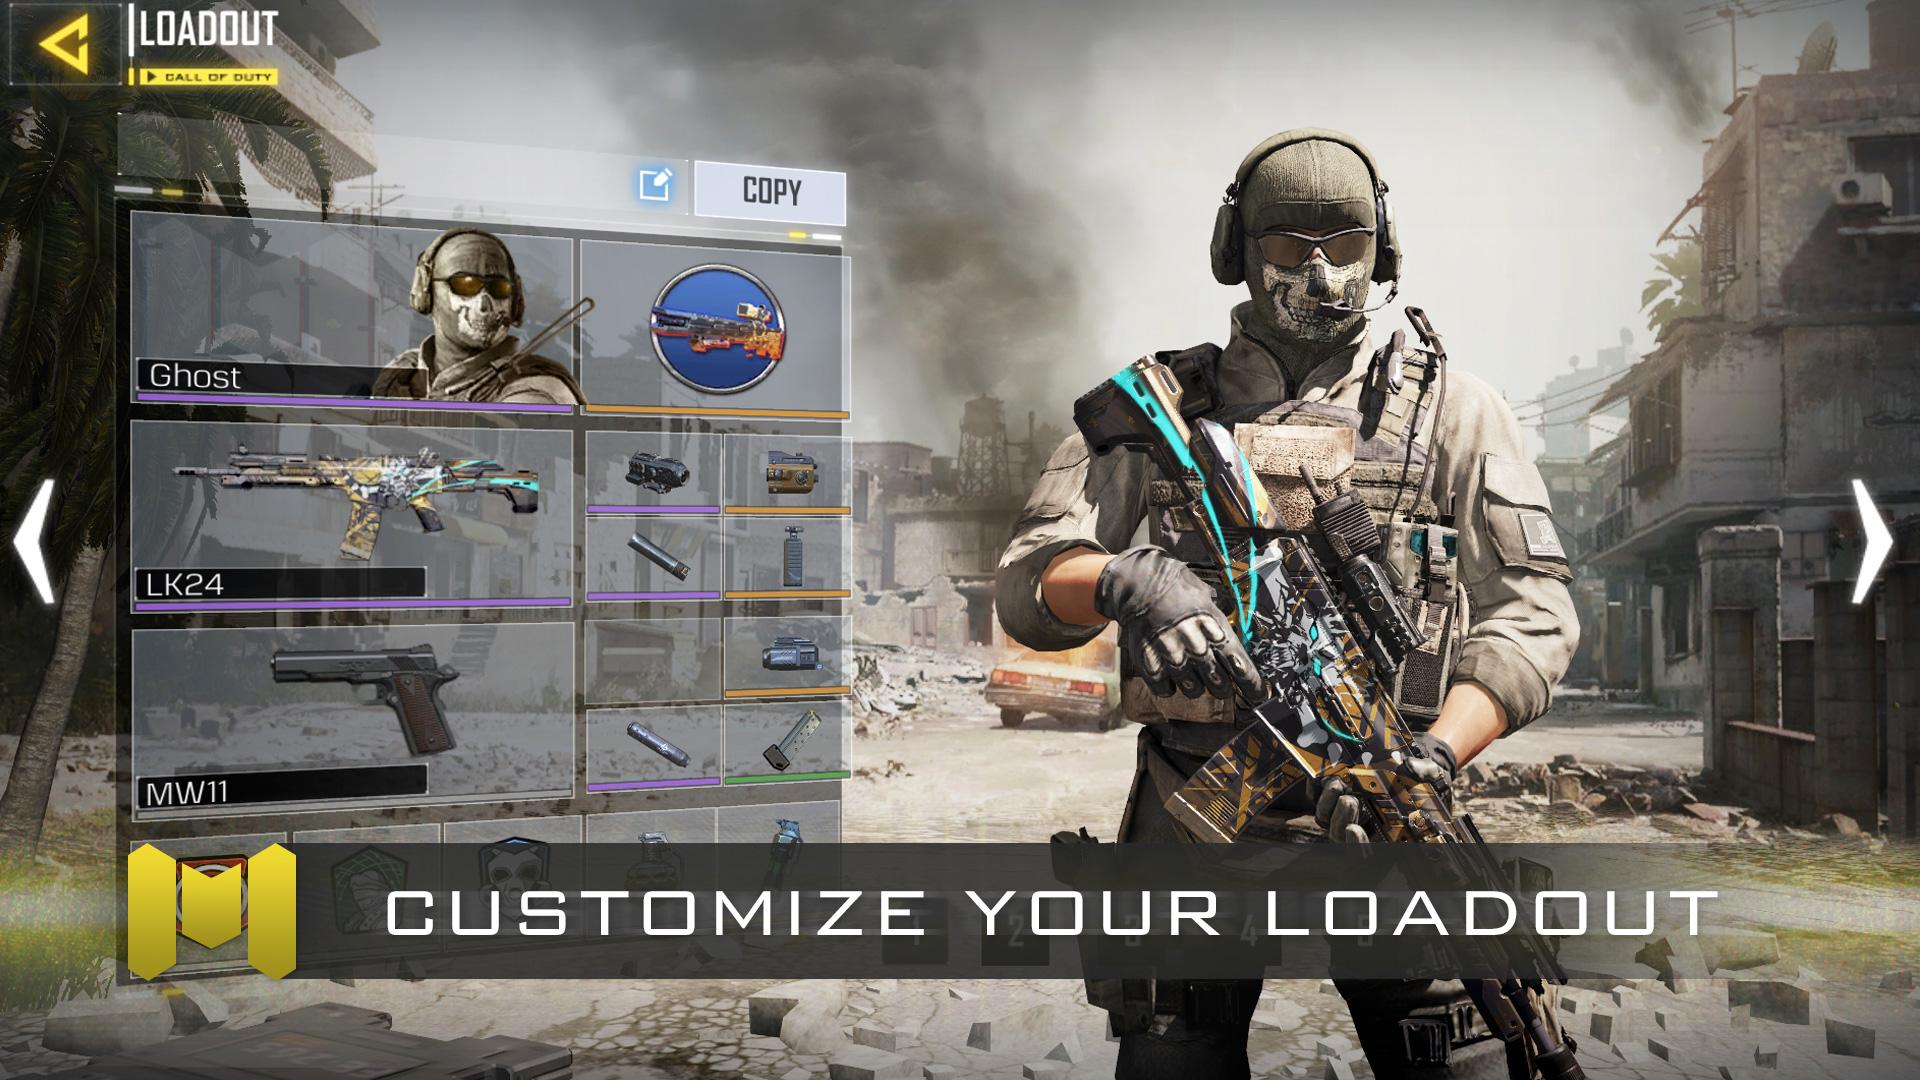 Beta Call of Duty Mobile release date Android and iOS